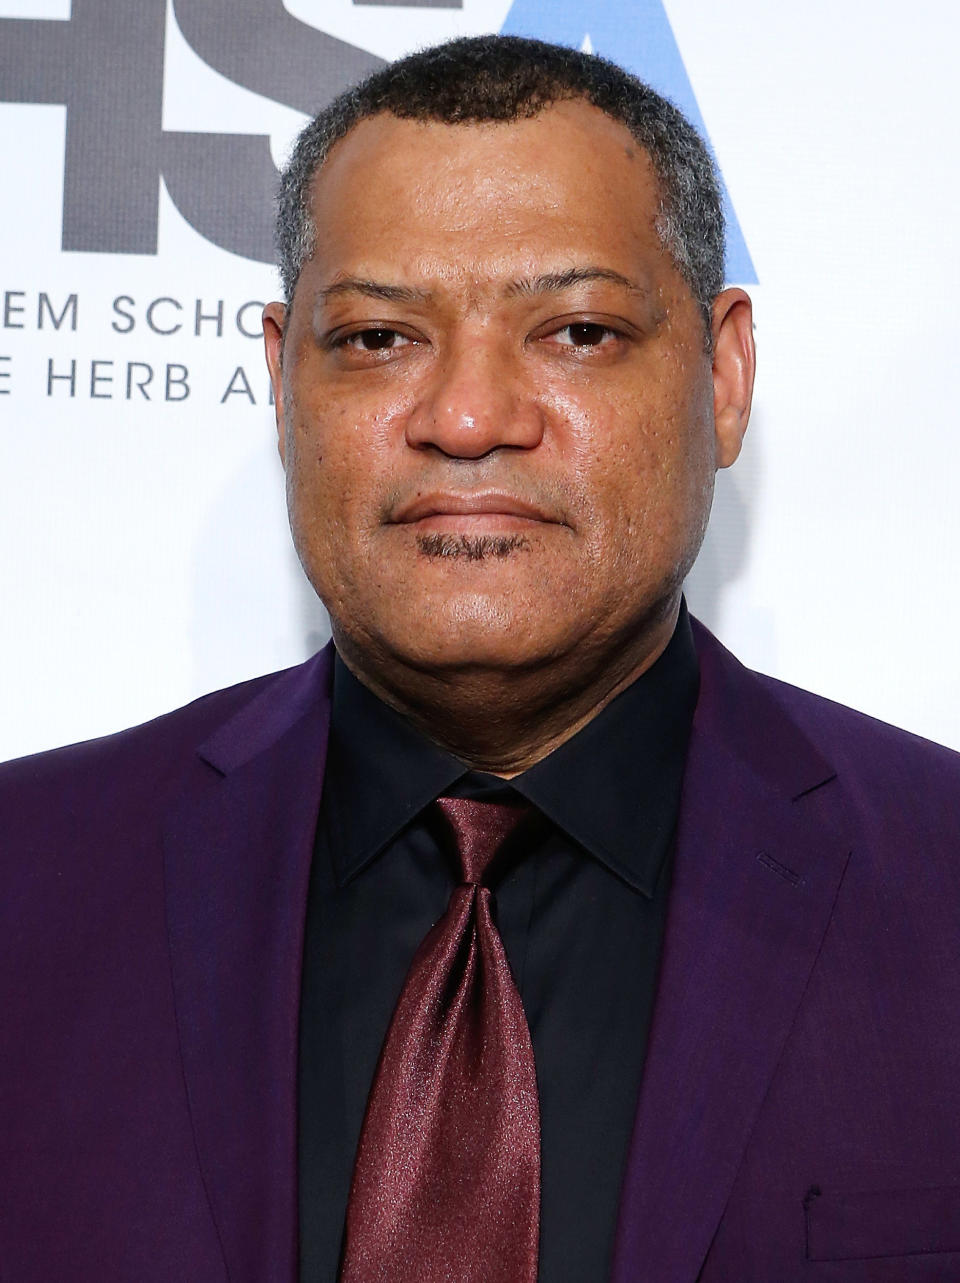 The 53-year-old actor is now a dad to three kids: Montana, Delilah, and Langston. 